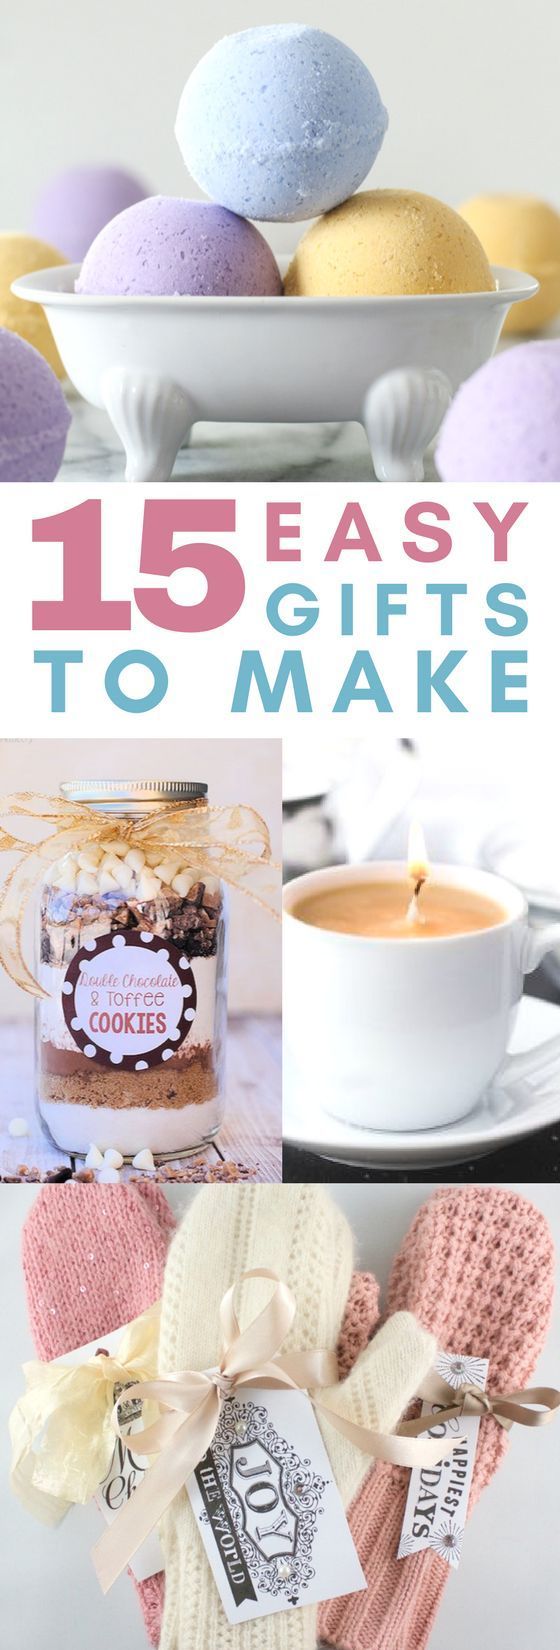 These 15 DIY Christmas Gifts Are So Thoughtful And Creative! I love how easy they are to make on the cheap if you are on a budget!